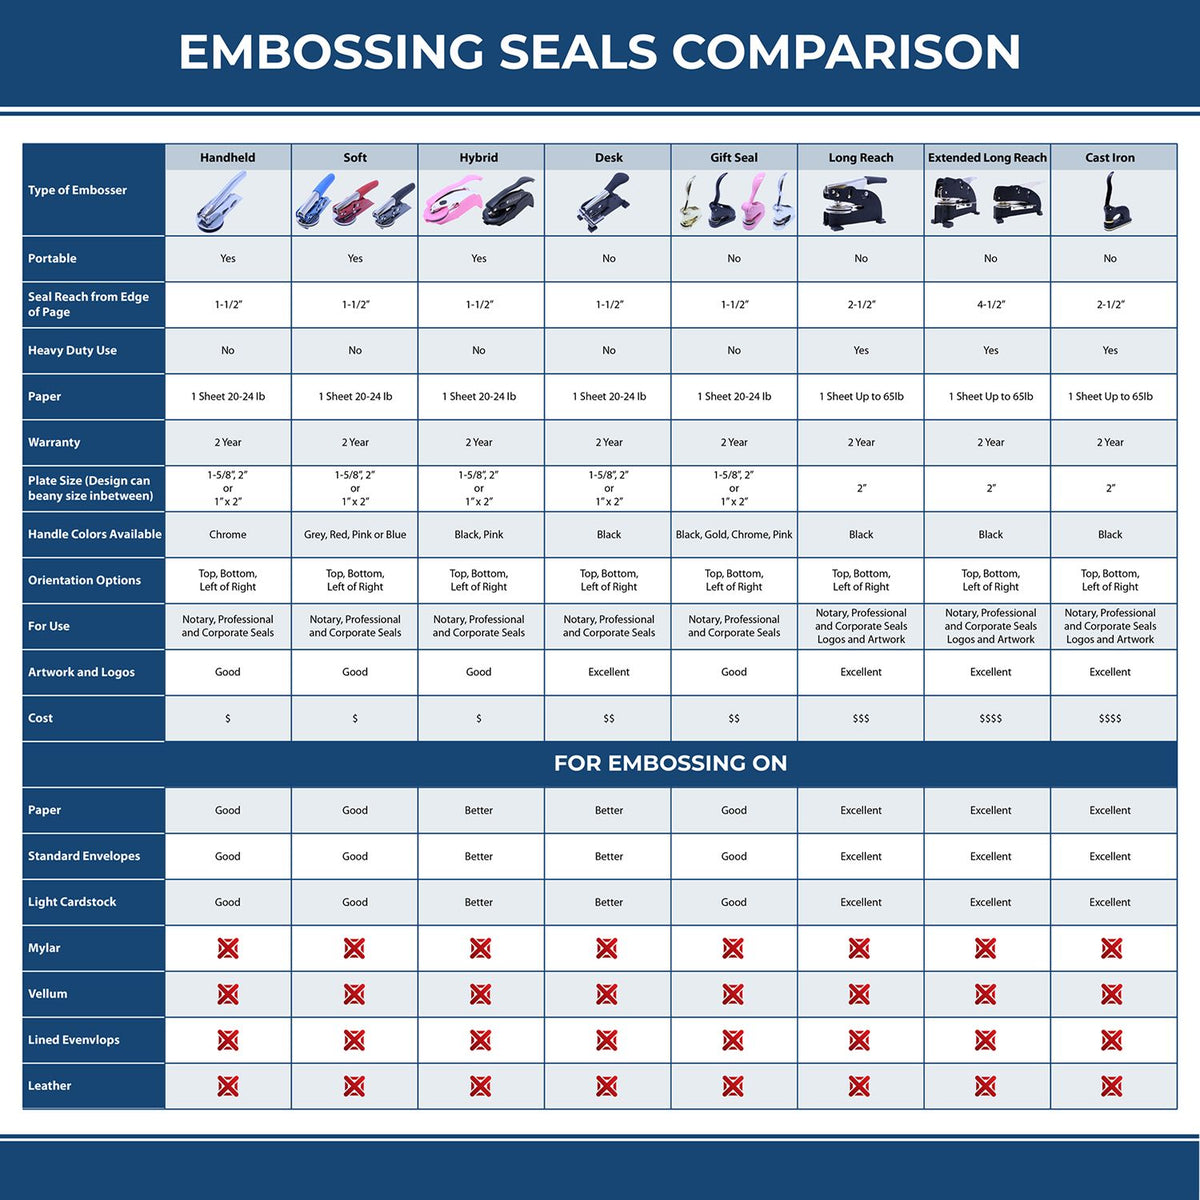 A comparison chart for the different types of mount models available for the State of Kansas Extended Long Reach Geologist Seal